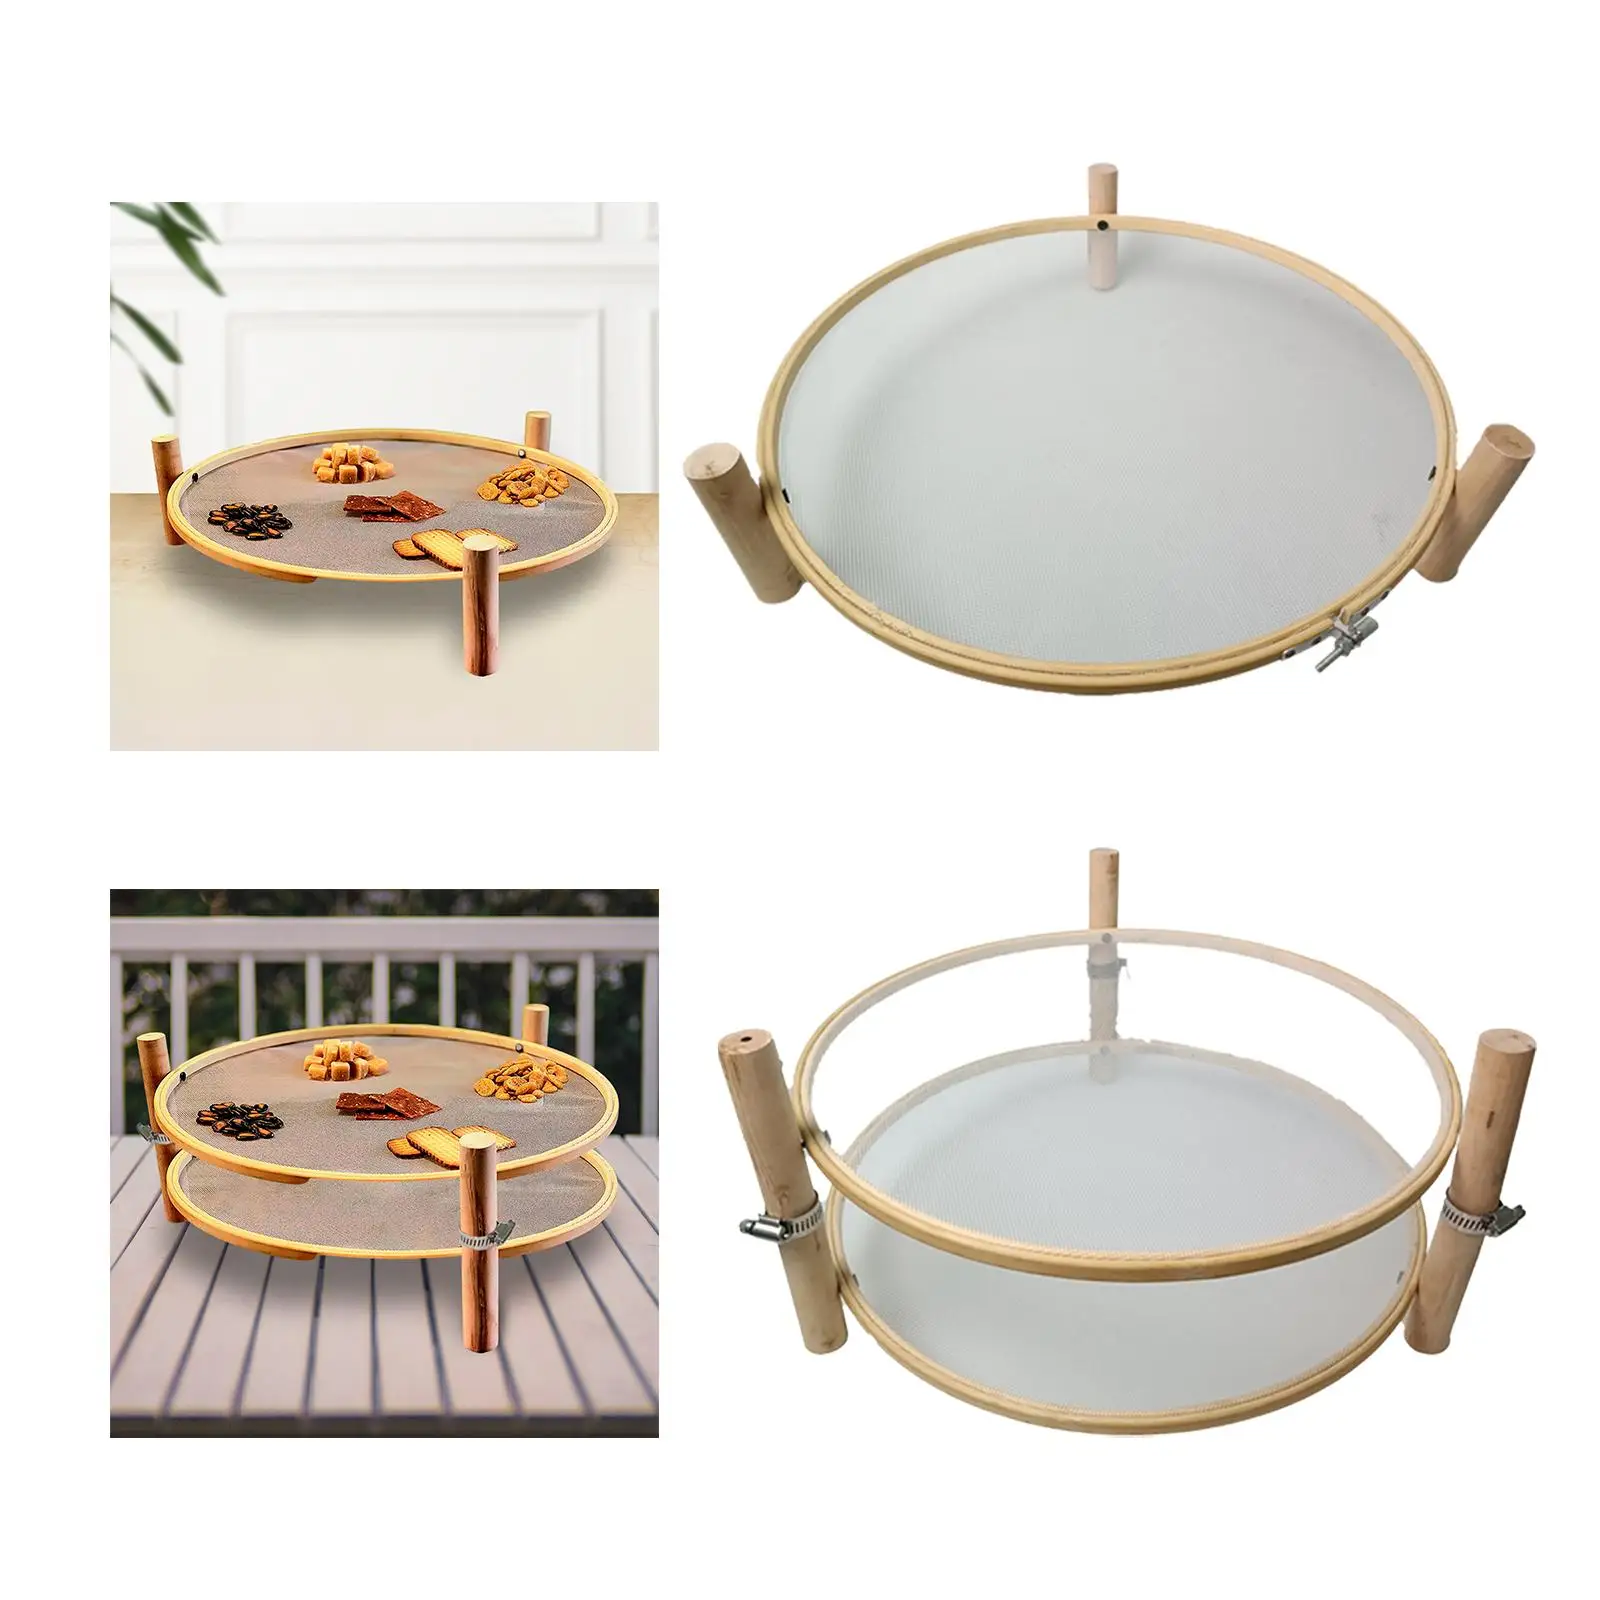 Round Pasta Drying Rack Kitchen Gadget Food Dryer Shelf Mesh Drying Net Household Dehydration Home Meat Vegetable Beef